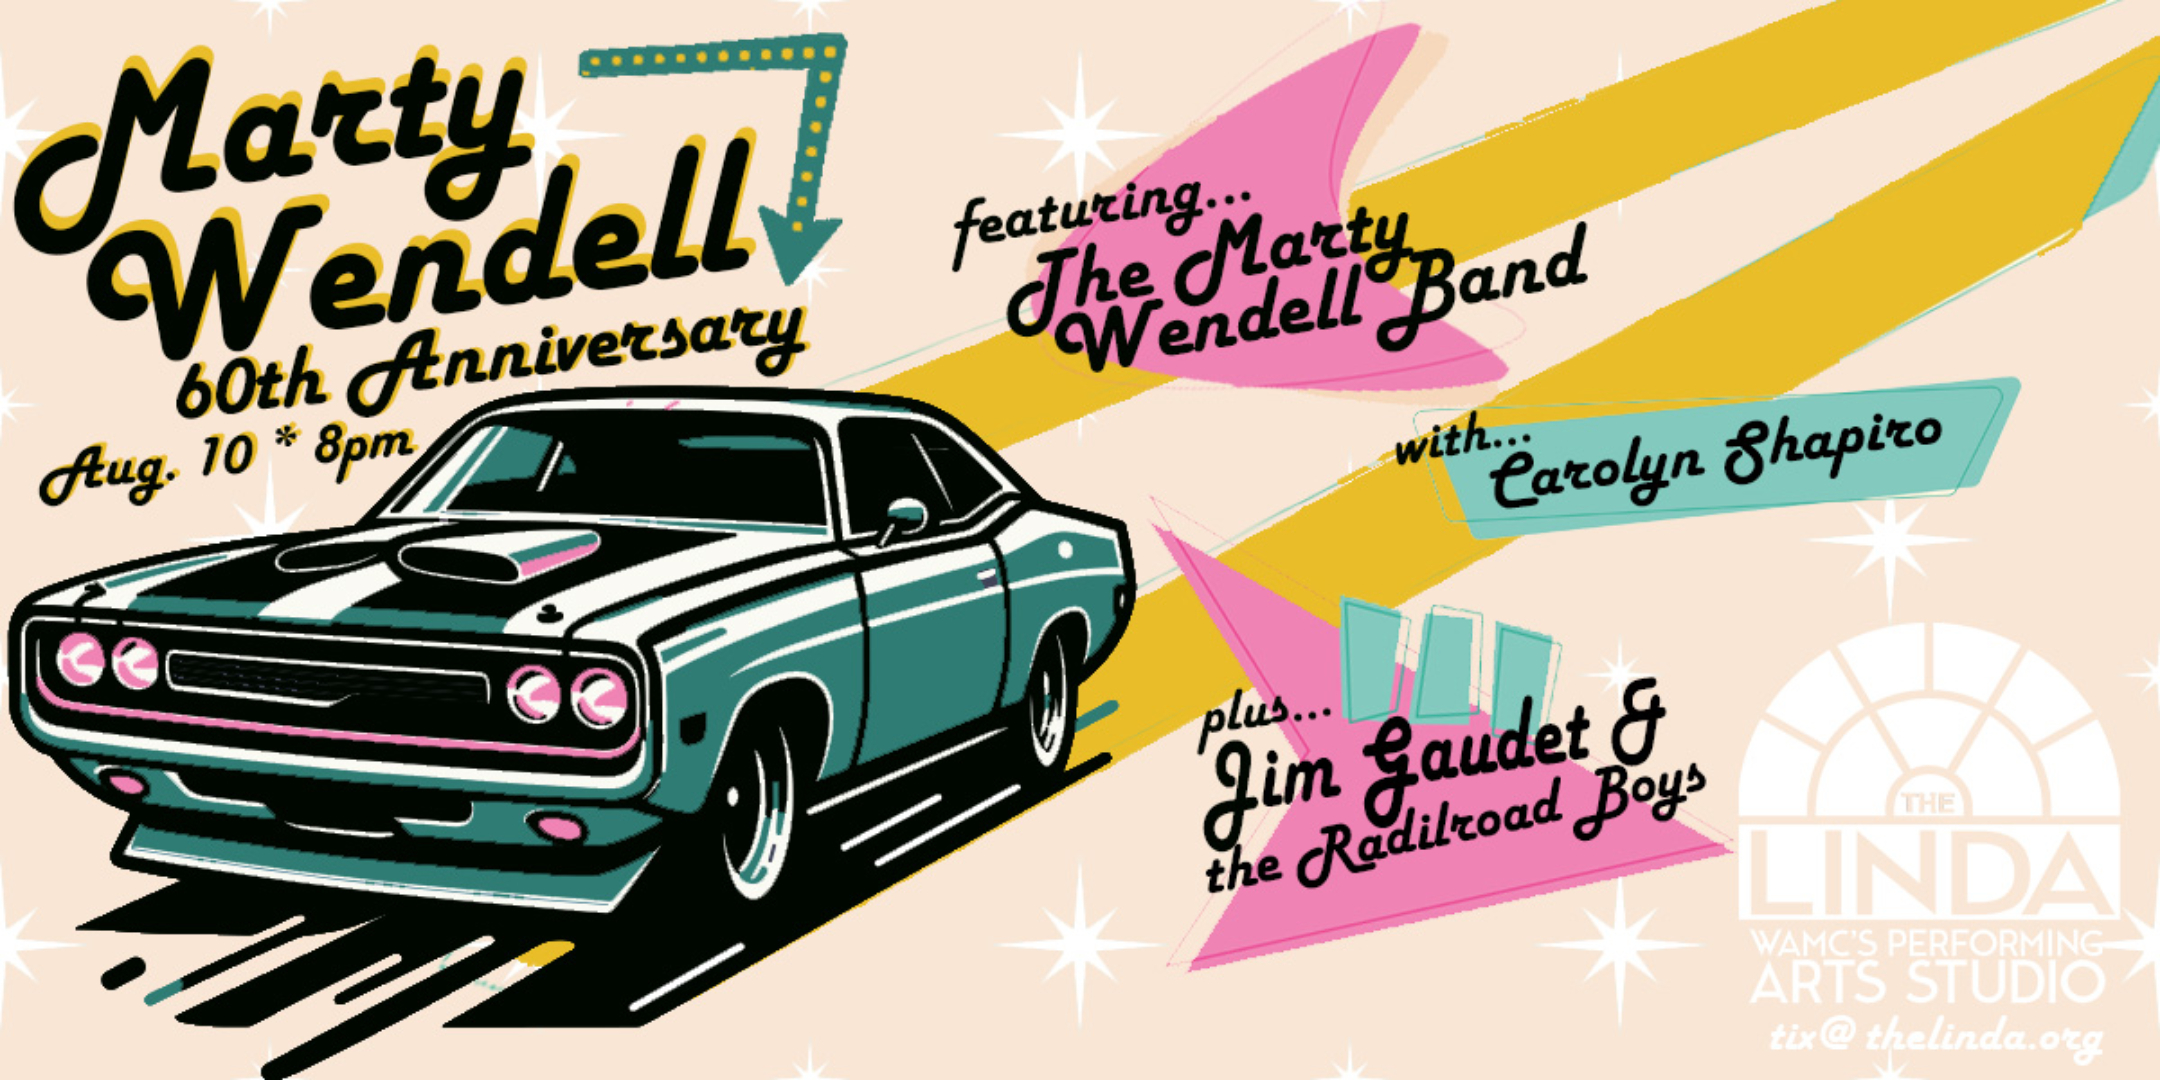 Marty Wendell 60th Anniversary Tour